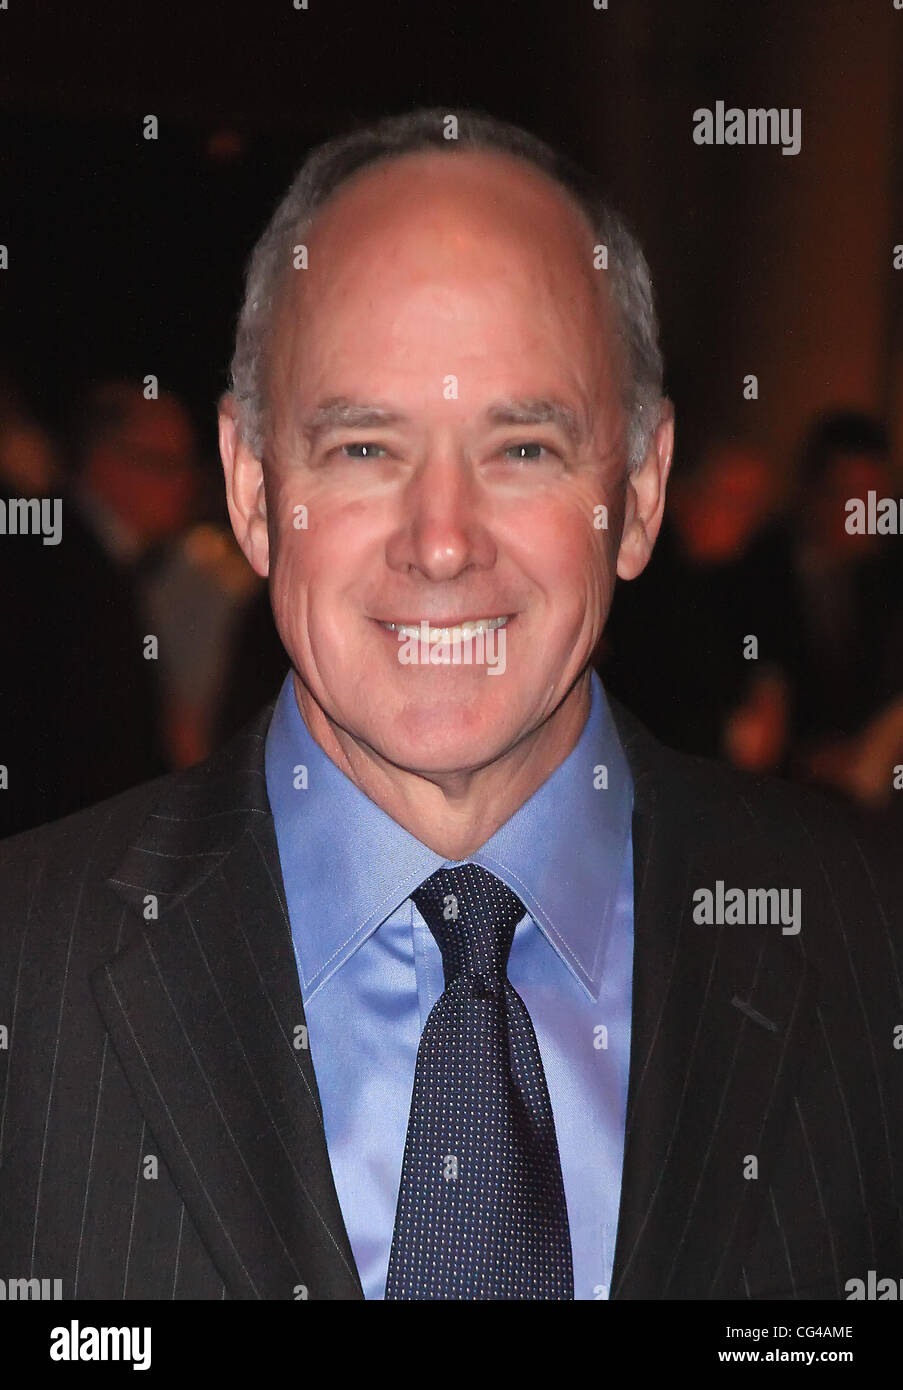 Sandy Alderson  Police Athletic League's 18th Annual Sporstnite event honoring Sandy Alderson and Terry Collins, held at Cipriani 42nd Street New York City, USA - 27.01.11 Stock Photo